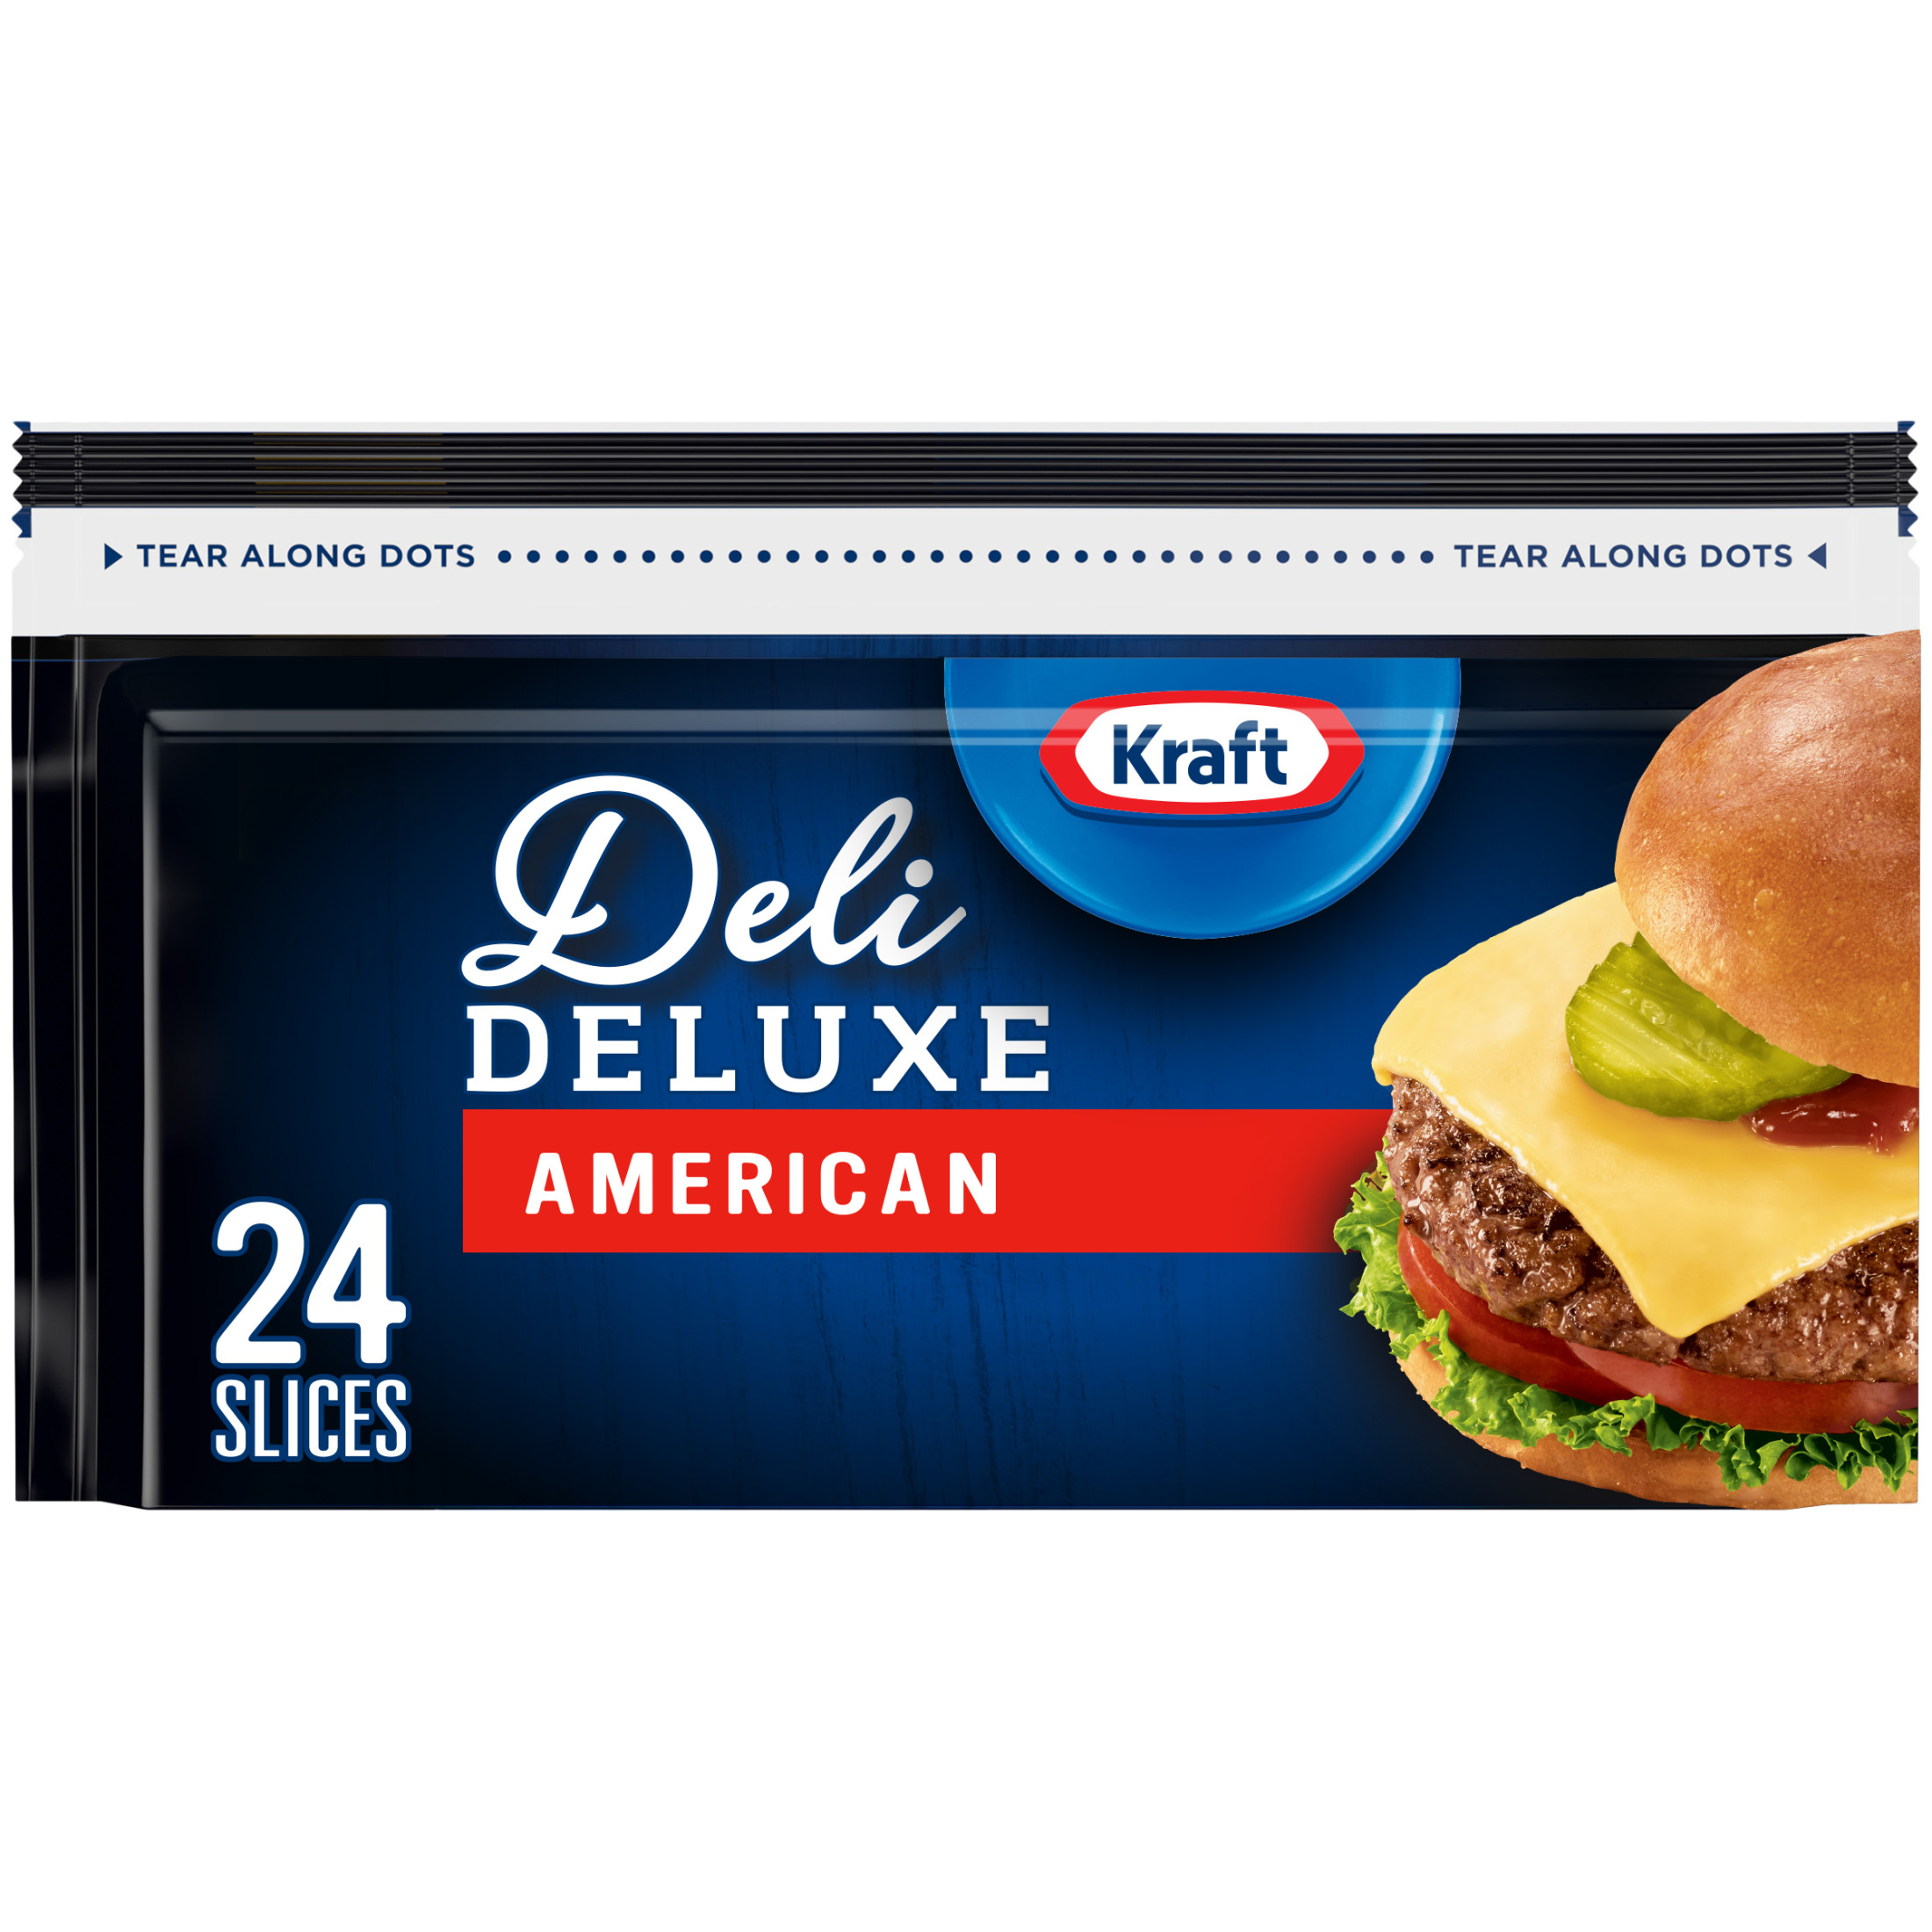 Kraft Deli Deluxe American Cheese Slices, 24 Ct Bag - image 1 of 13